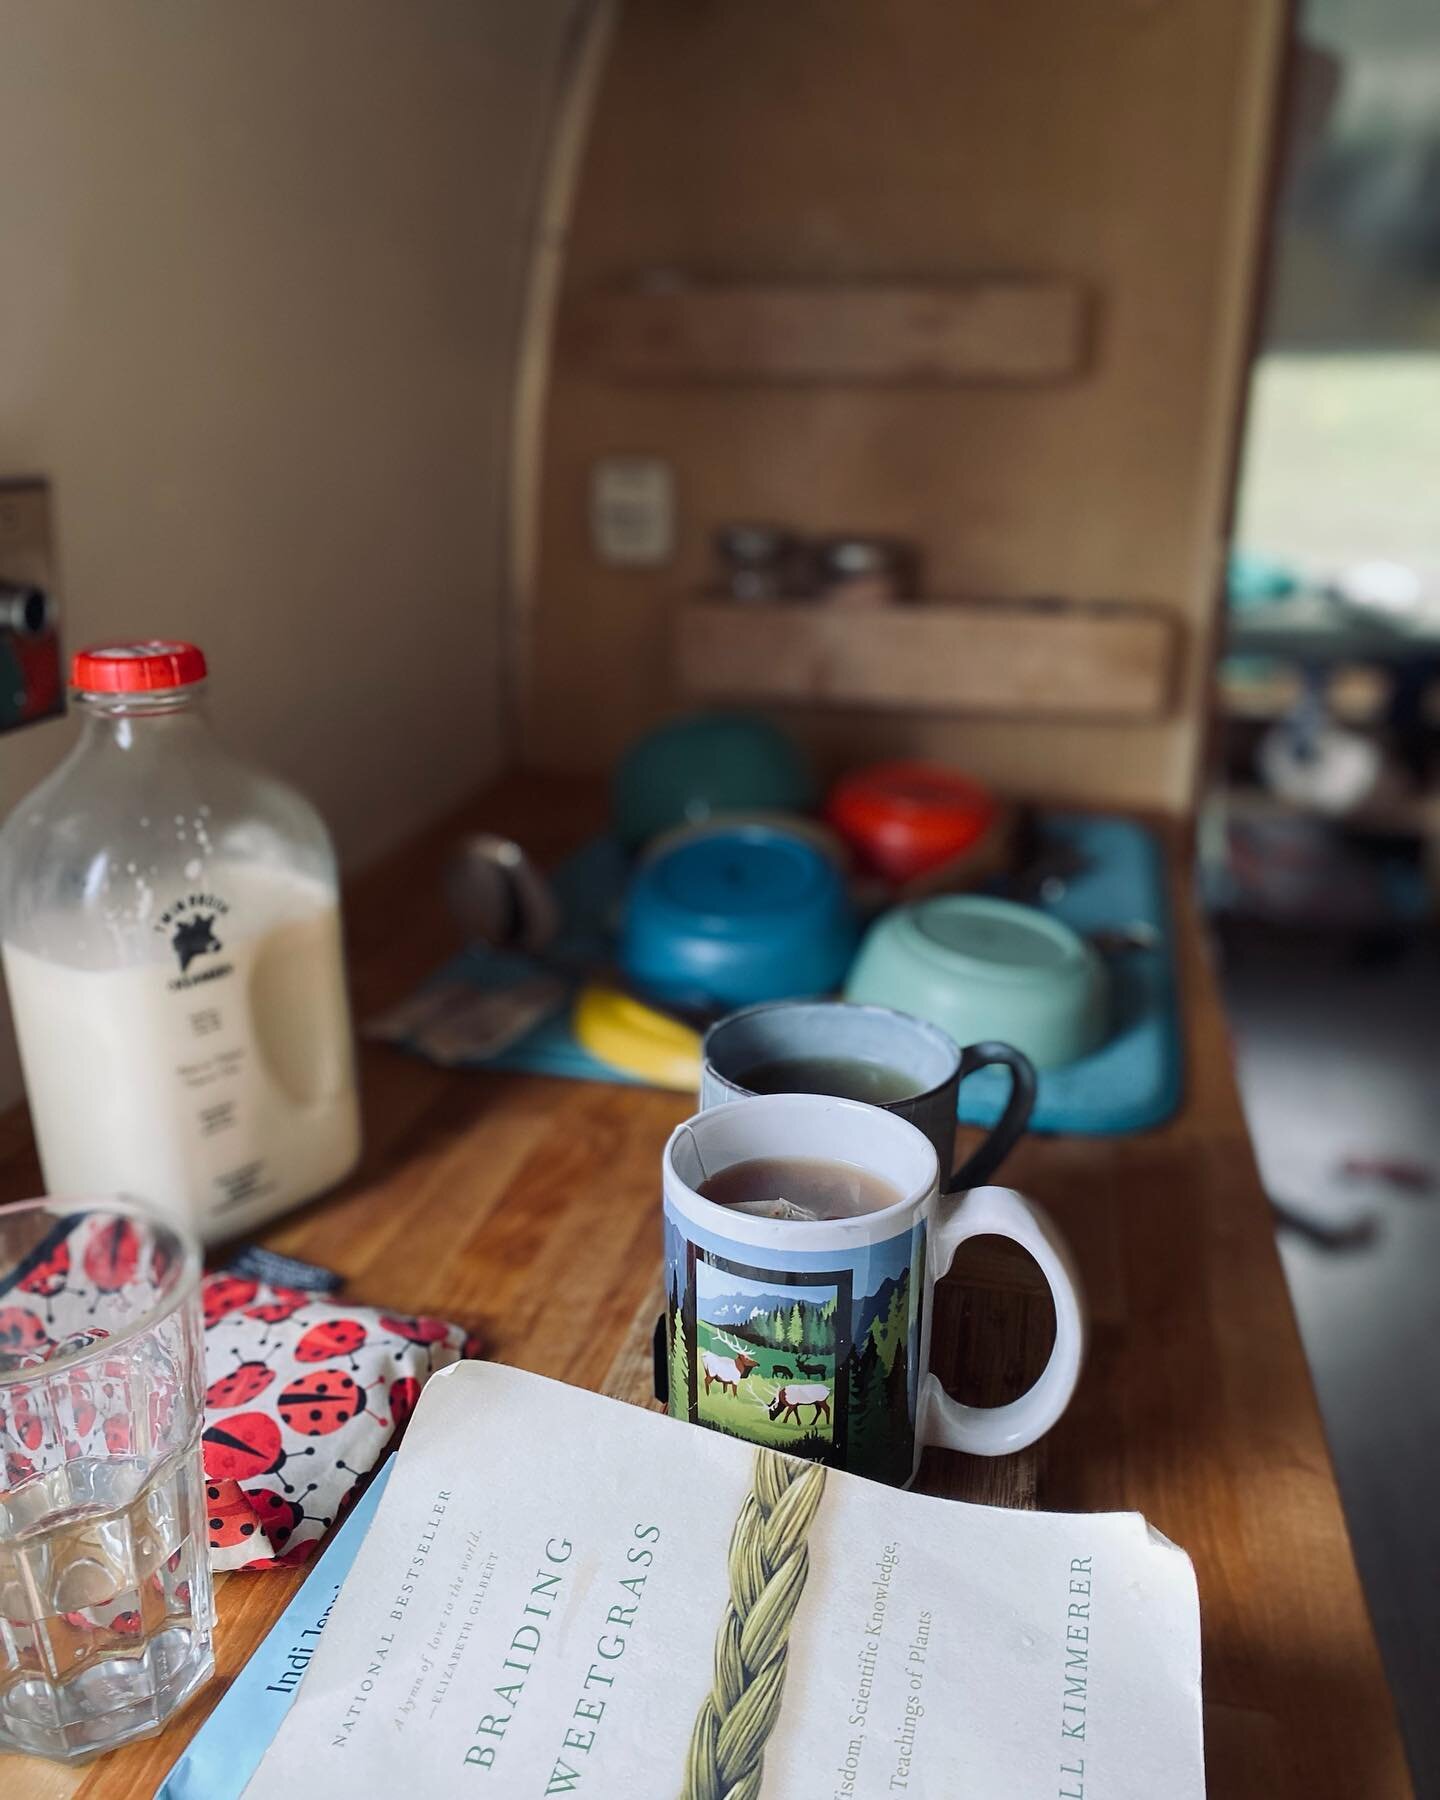 Just sipping a big mug of spicy hot lemon and ginger tea as several feet of snow accumulates outside 😳.
.
We got back today from a little getaway to the Oregon coast in the airstream, because who doesn&rsquo;t love to get windswept on a beach in Dec